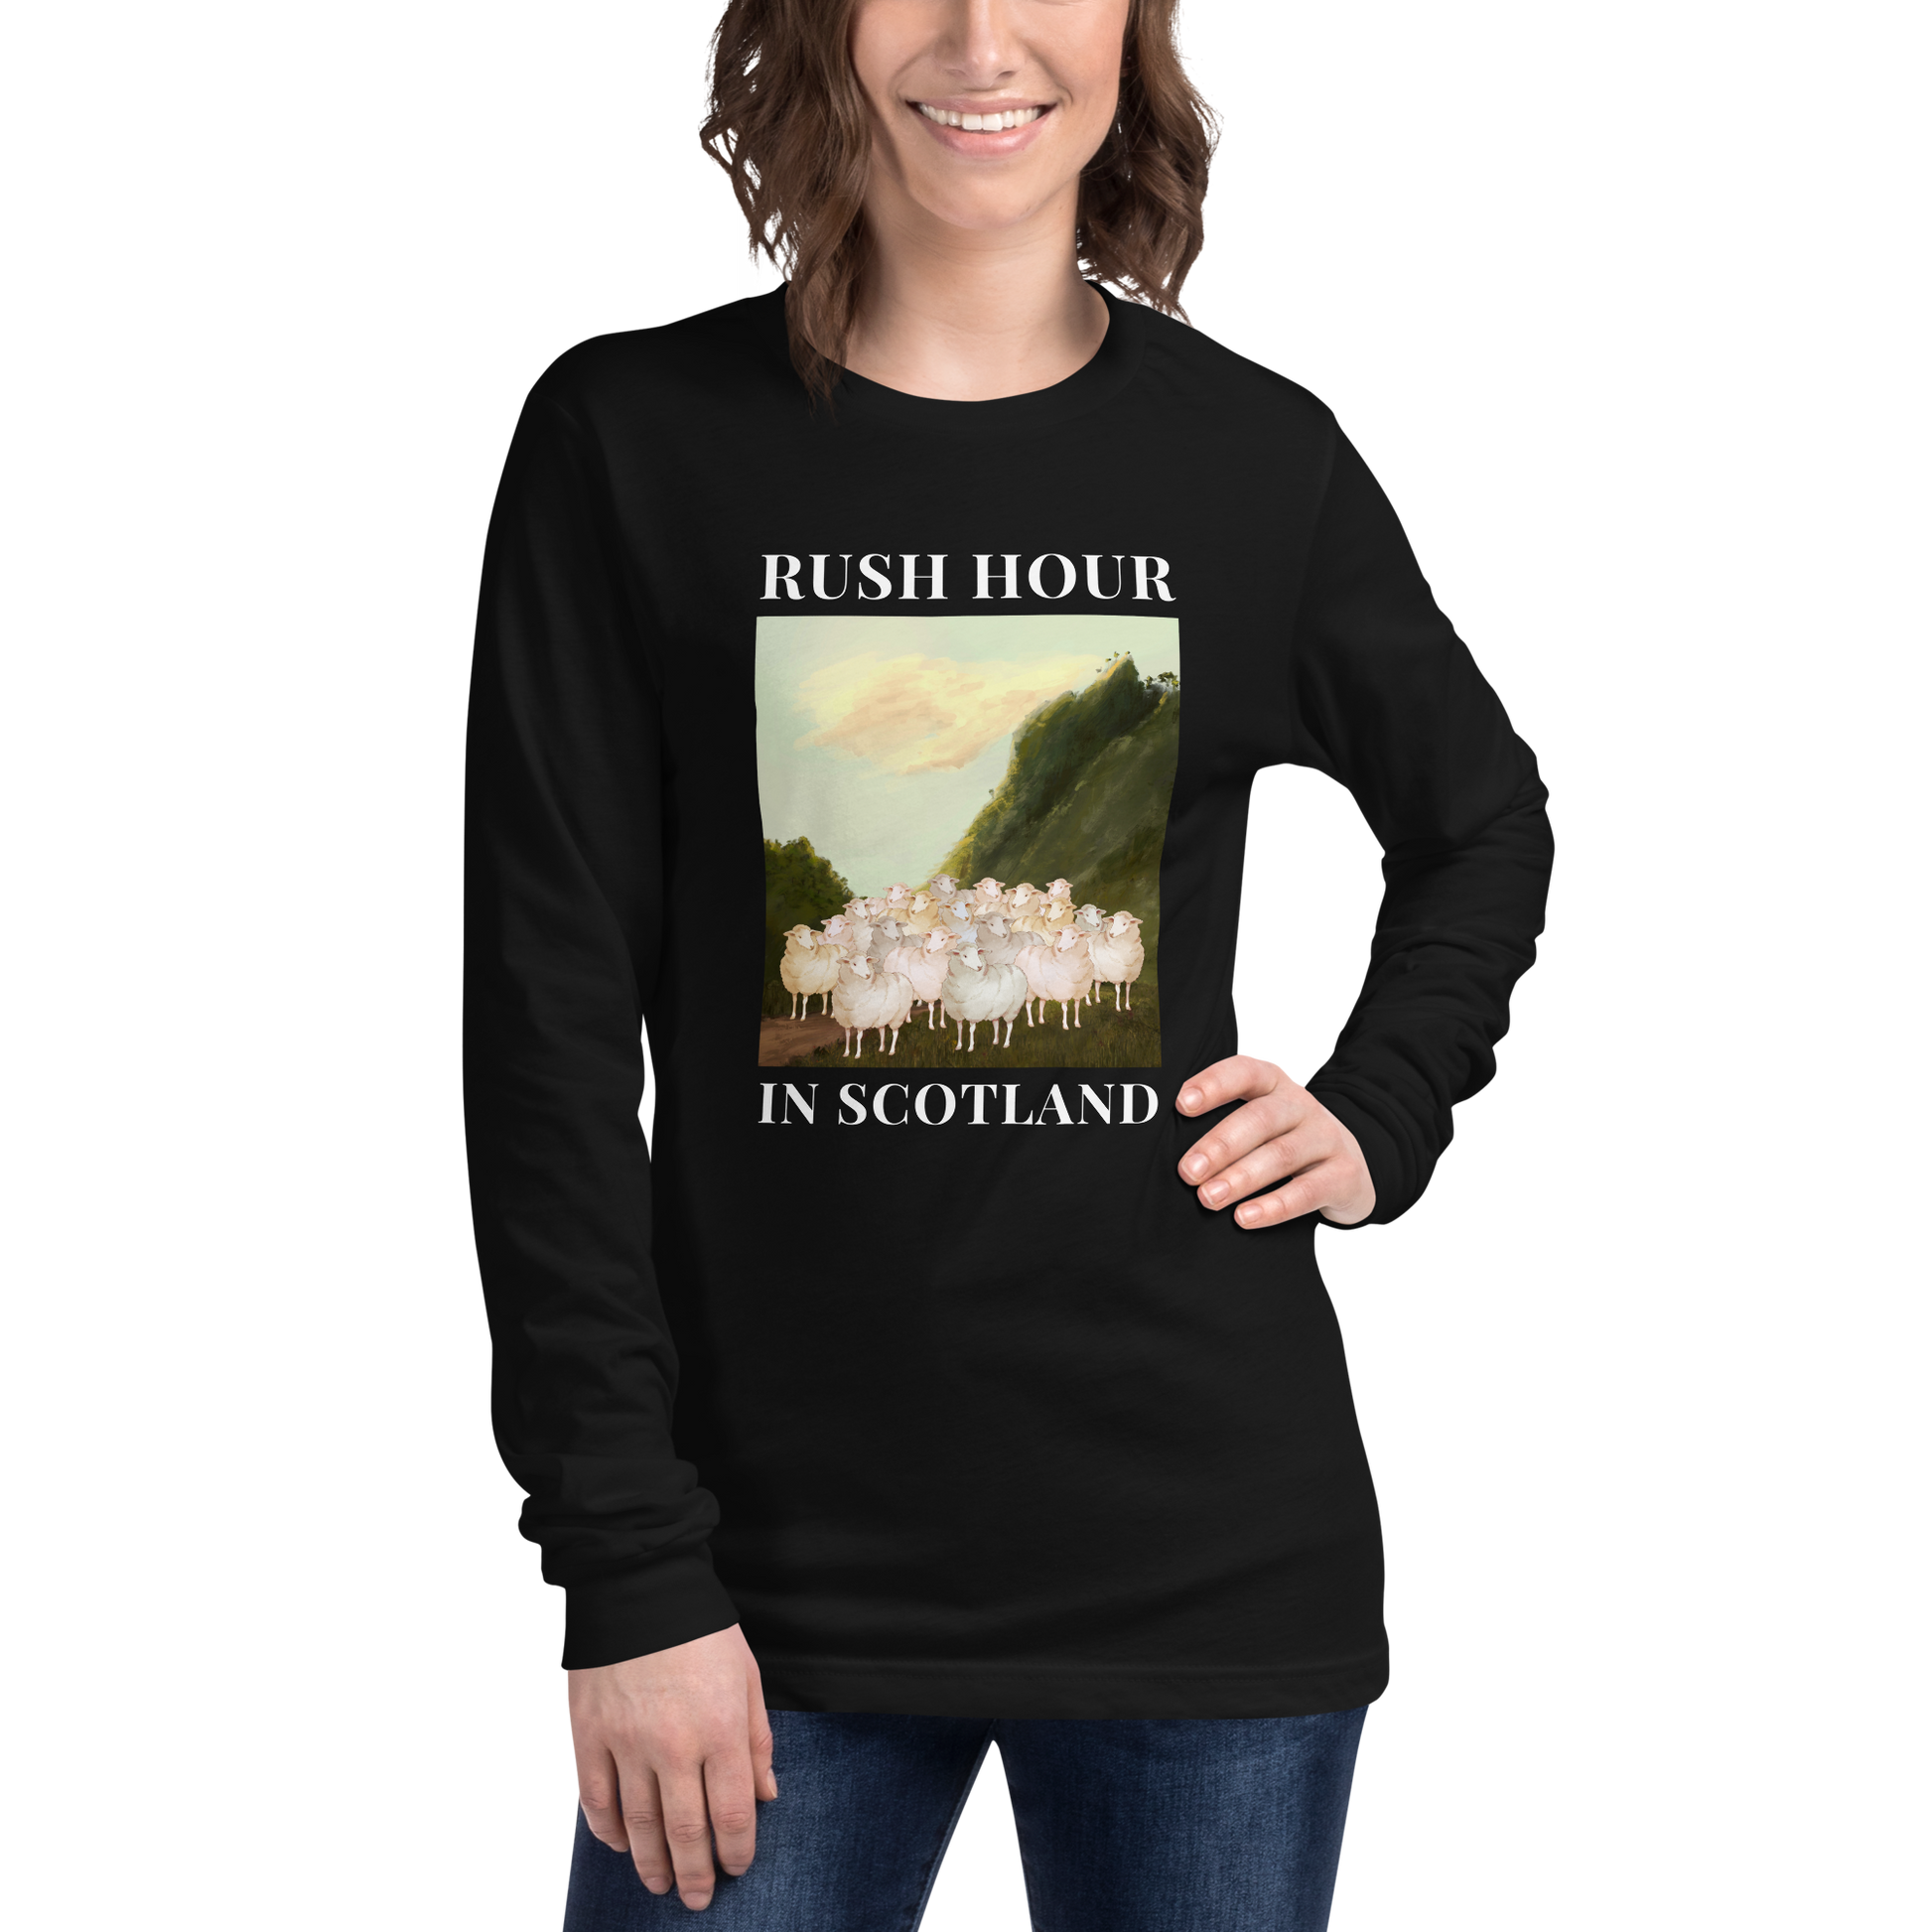 Woman wearing a Black Sheep Long Sleeve Tee featuring a comical Rush Hour In Scotland graphic on the chest - Artsy/Funny Sheep Long Sleeve Graphic Tees - Boozy Fox